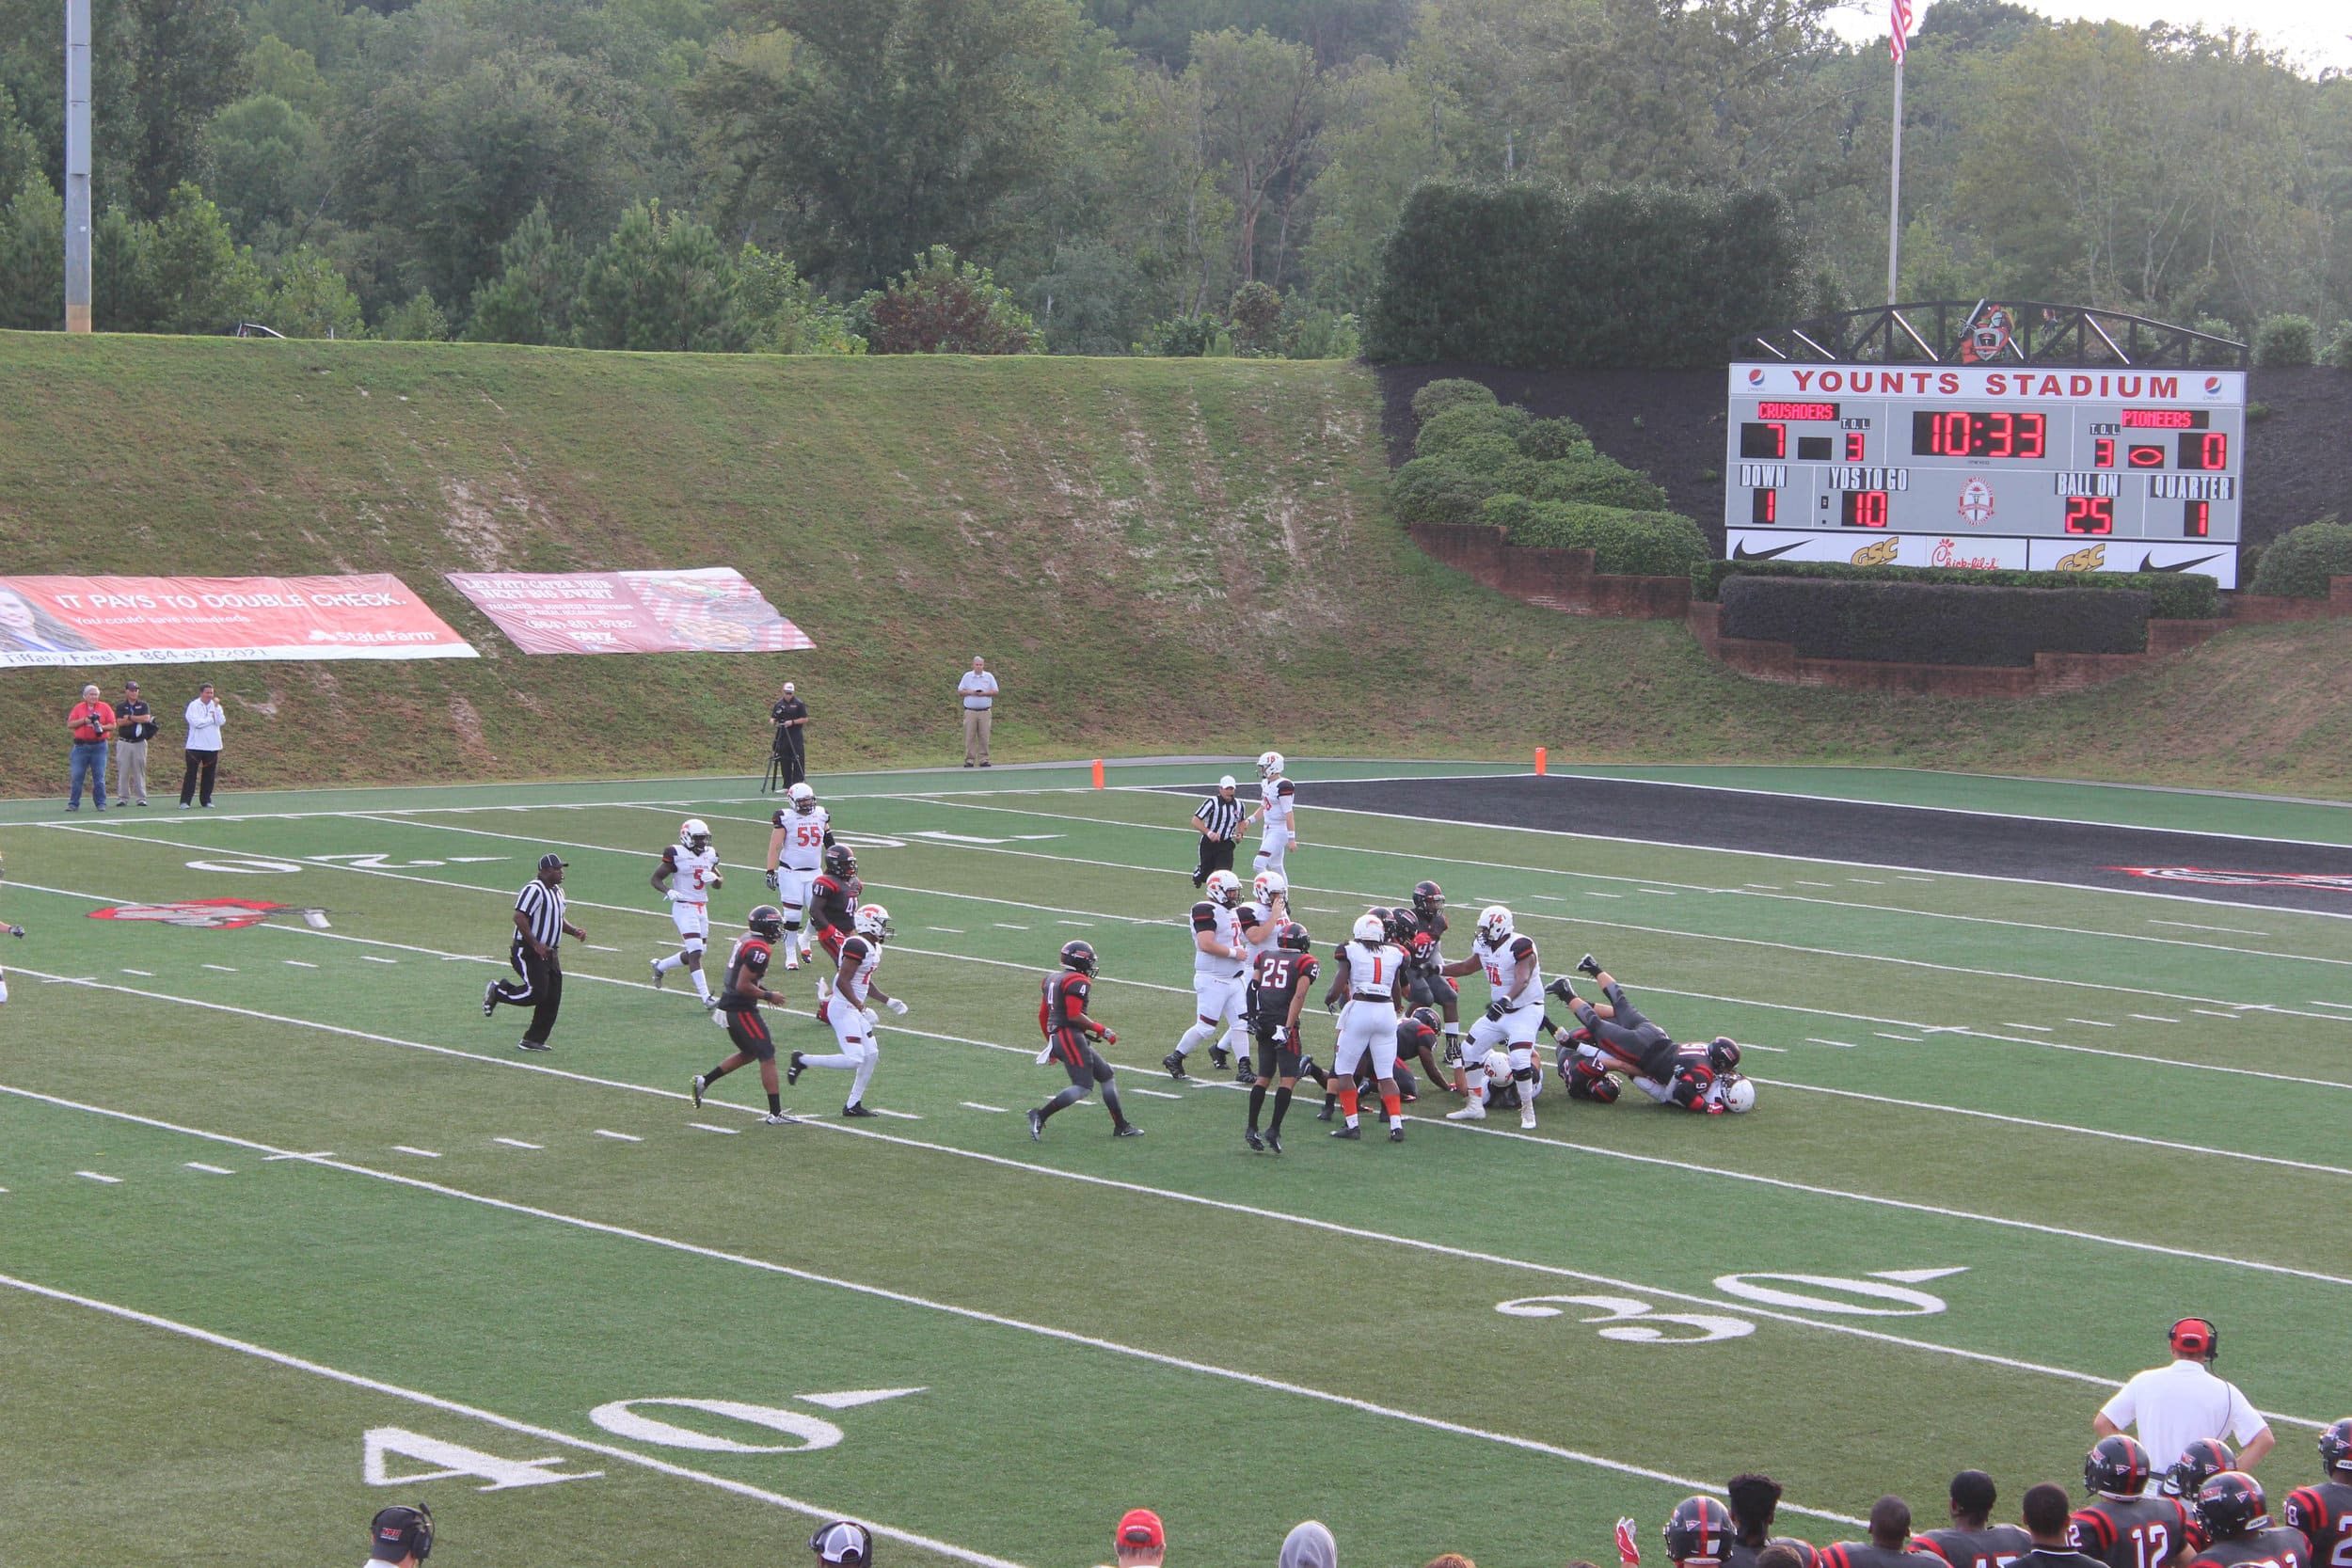 Starting the game off by scoring the first touchdown against Tusculum College.